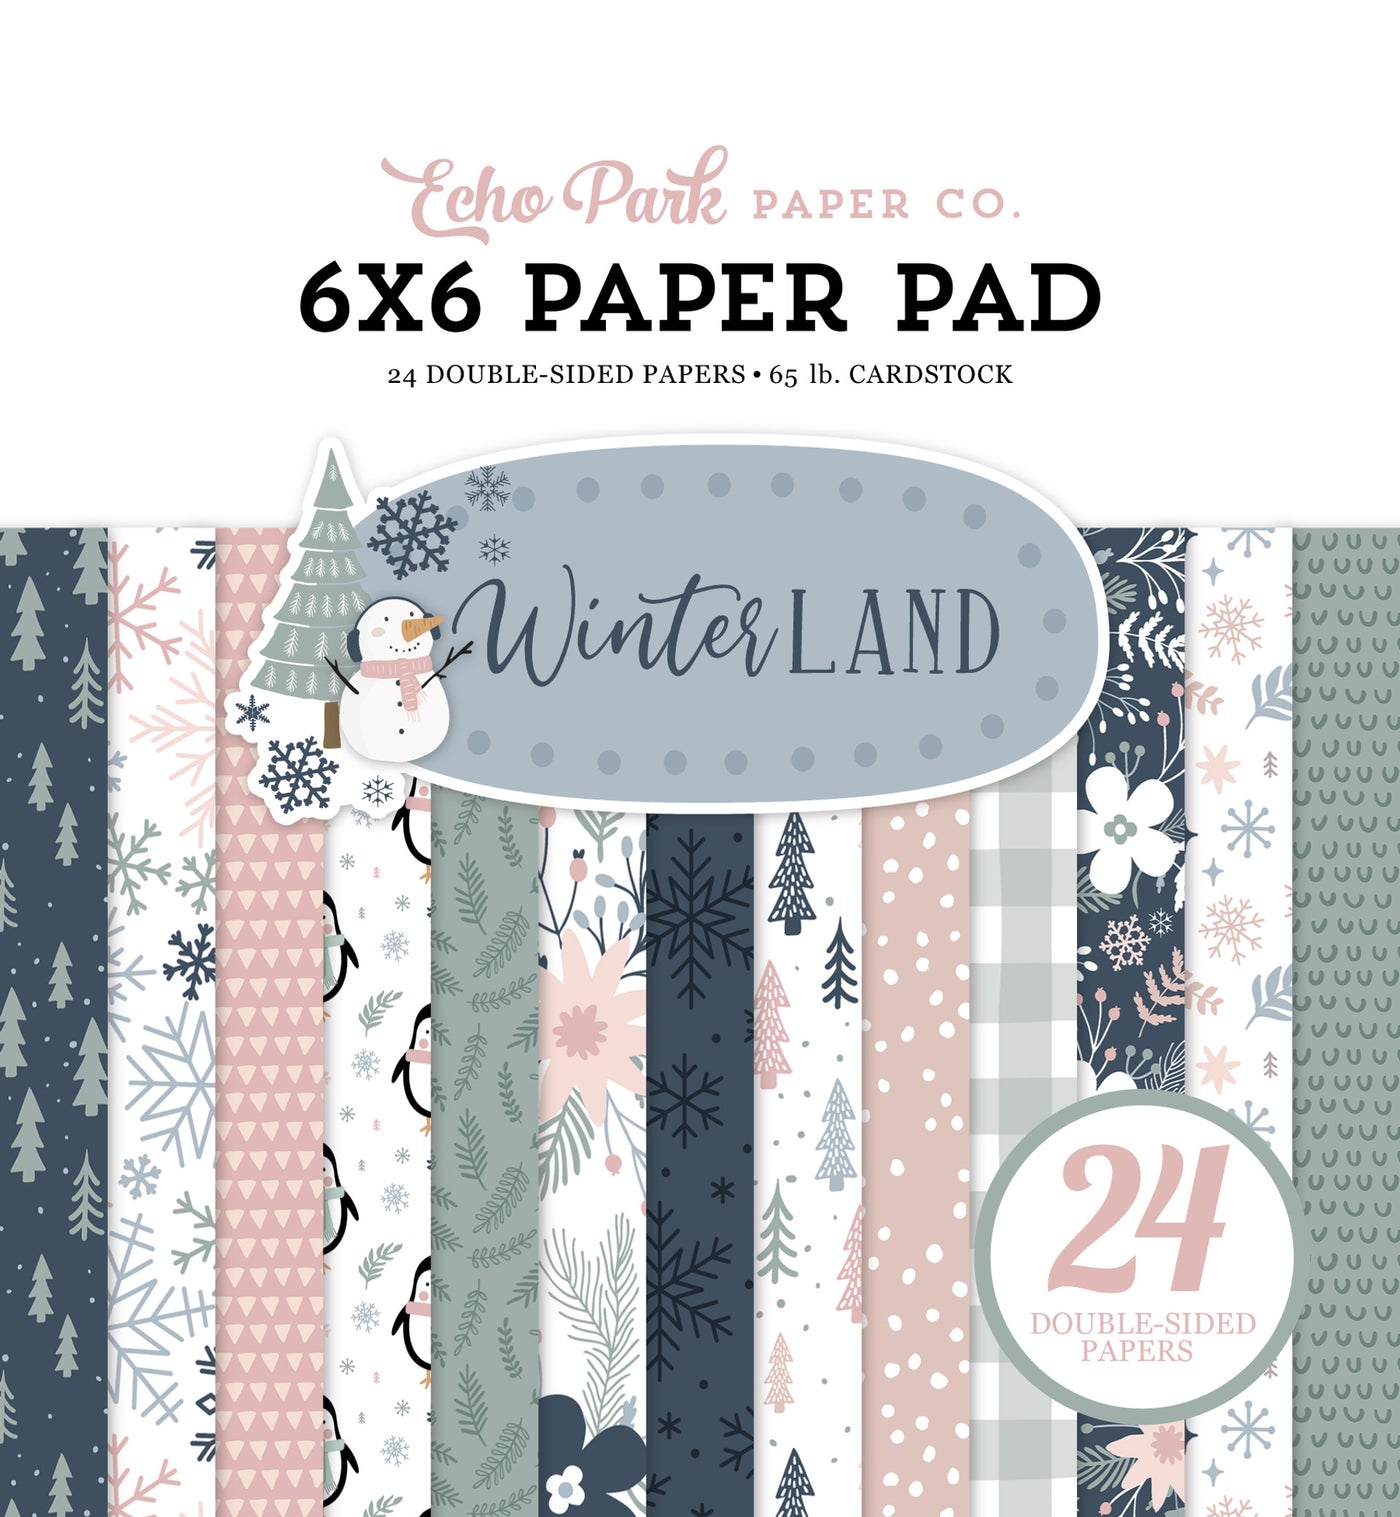 6x6 pad features a winter theme in icy blues, pink, and whites; fun for cards and papercrafts; includes 24 double-sided pages- Echo Park